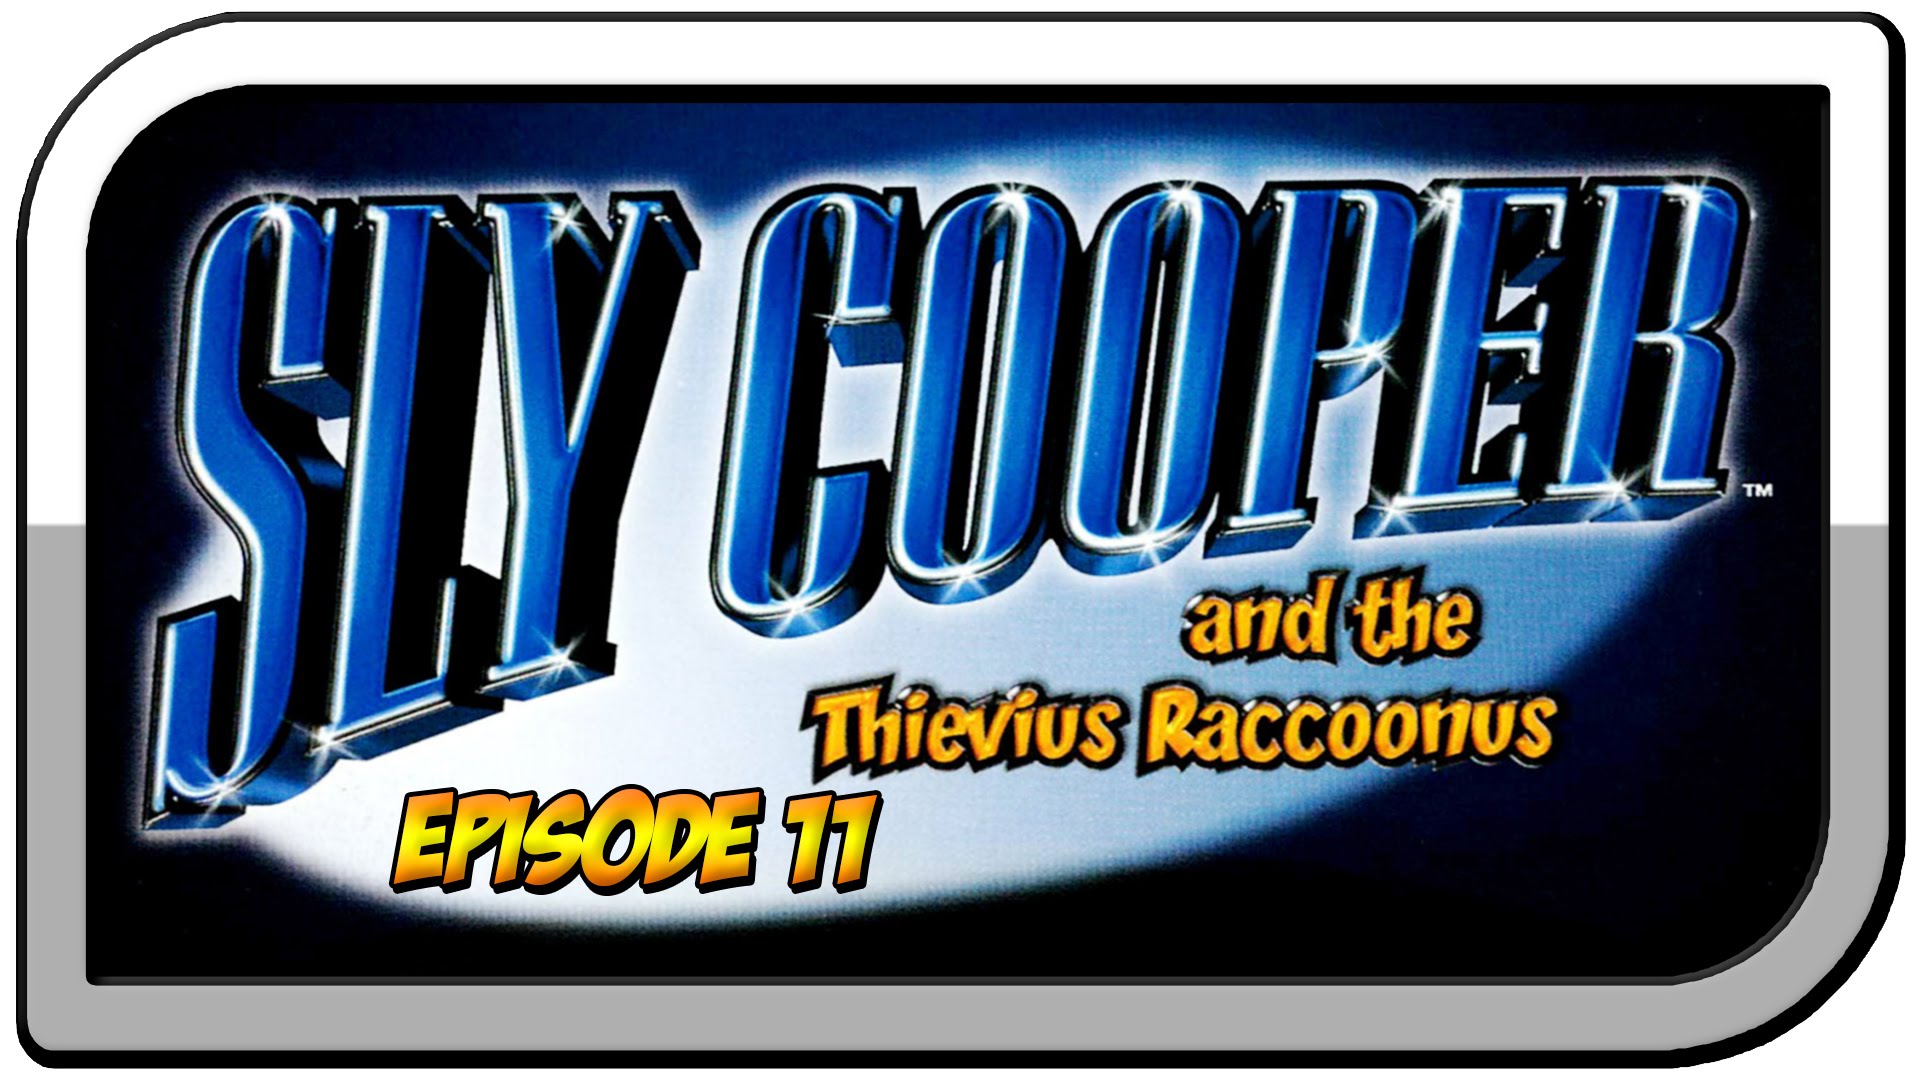 High Resolution Wallpaper | Sly Cooper And The Thievius Raccoonus 1920x1080 px